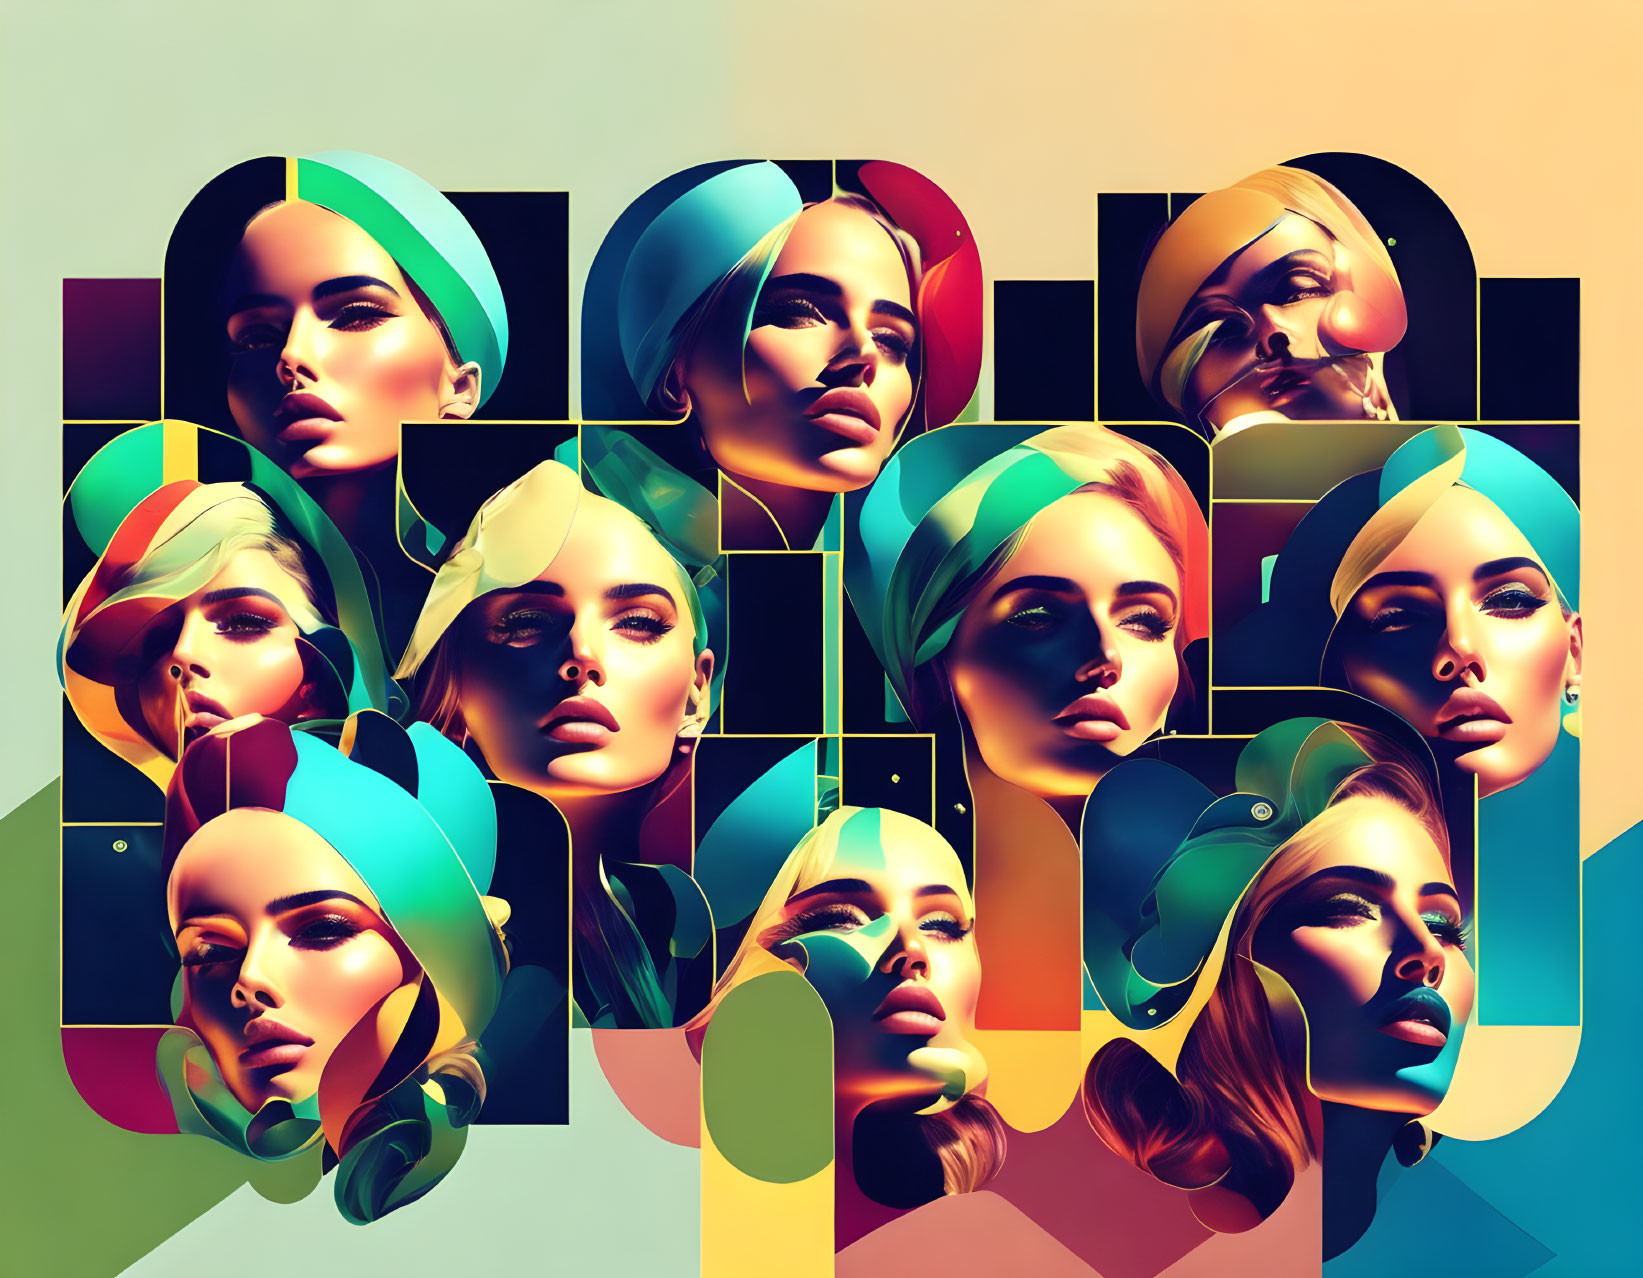 Colorful Stylized Female Faces in Grid Pattern with Modern Fashion and Abstract Design